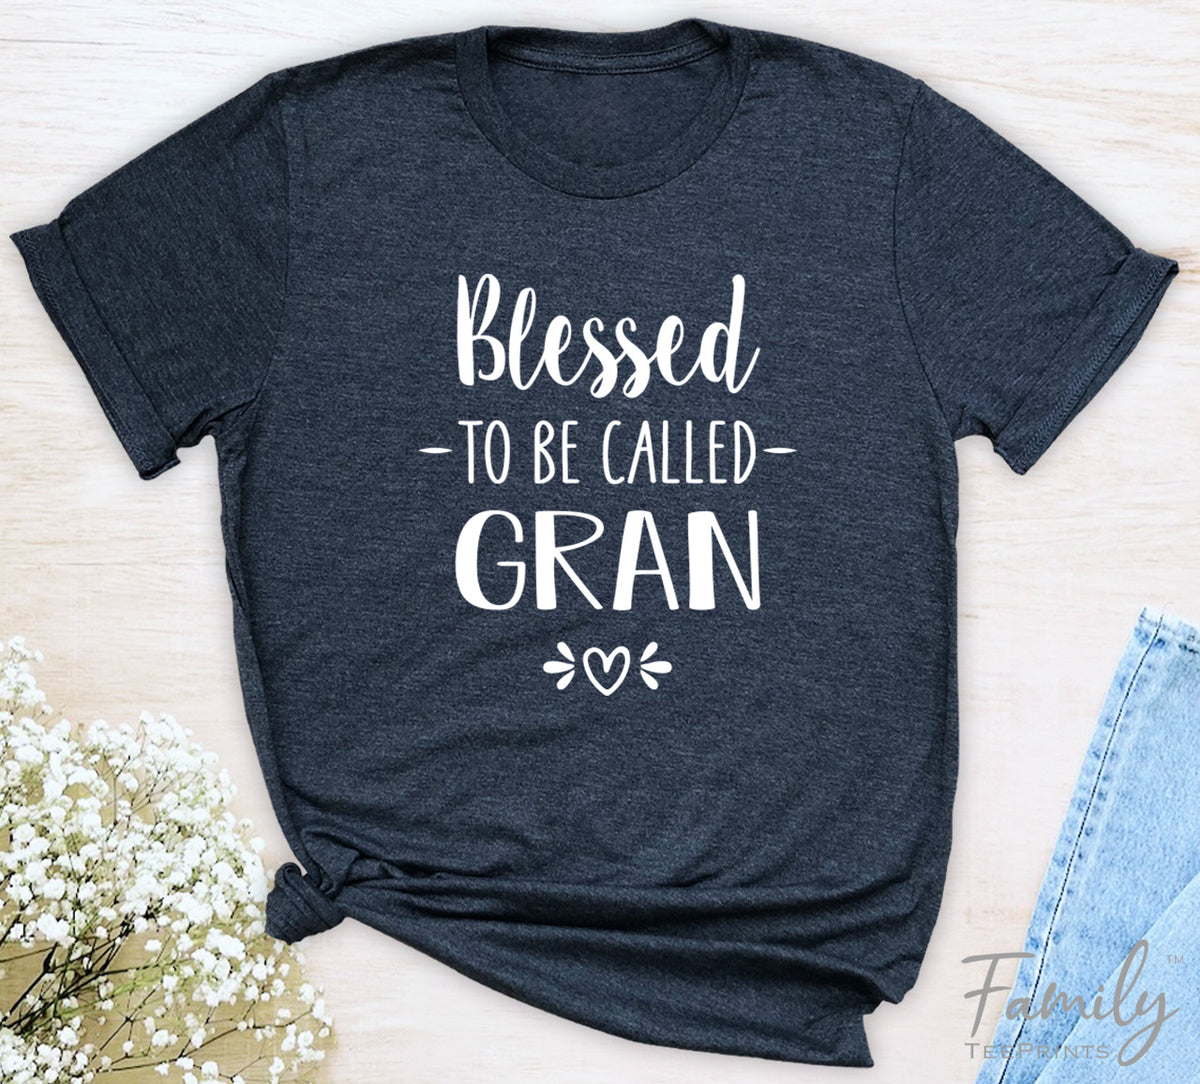 Blessed To Be Called Gran - Unisex T-shirt - Gran Shirt - Gift For New Gran - familyteeprints